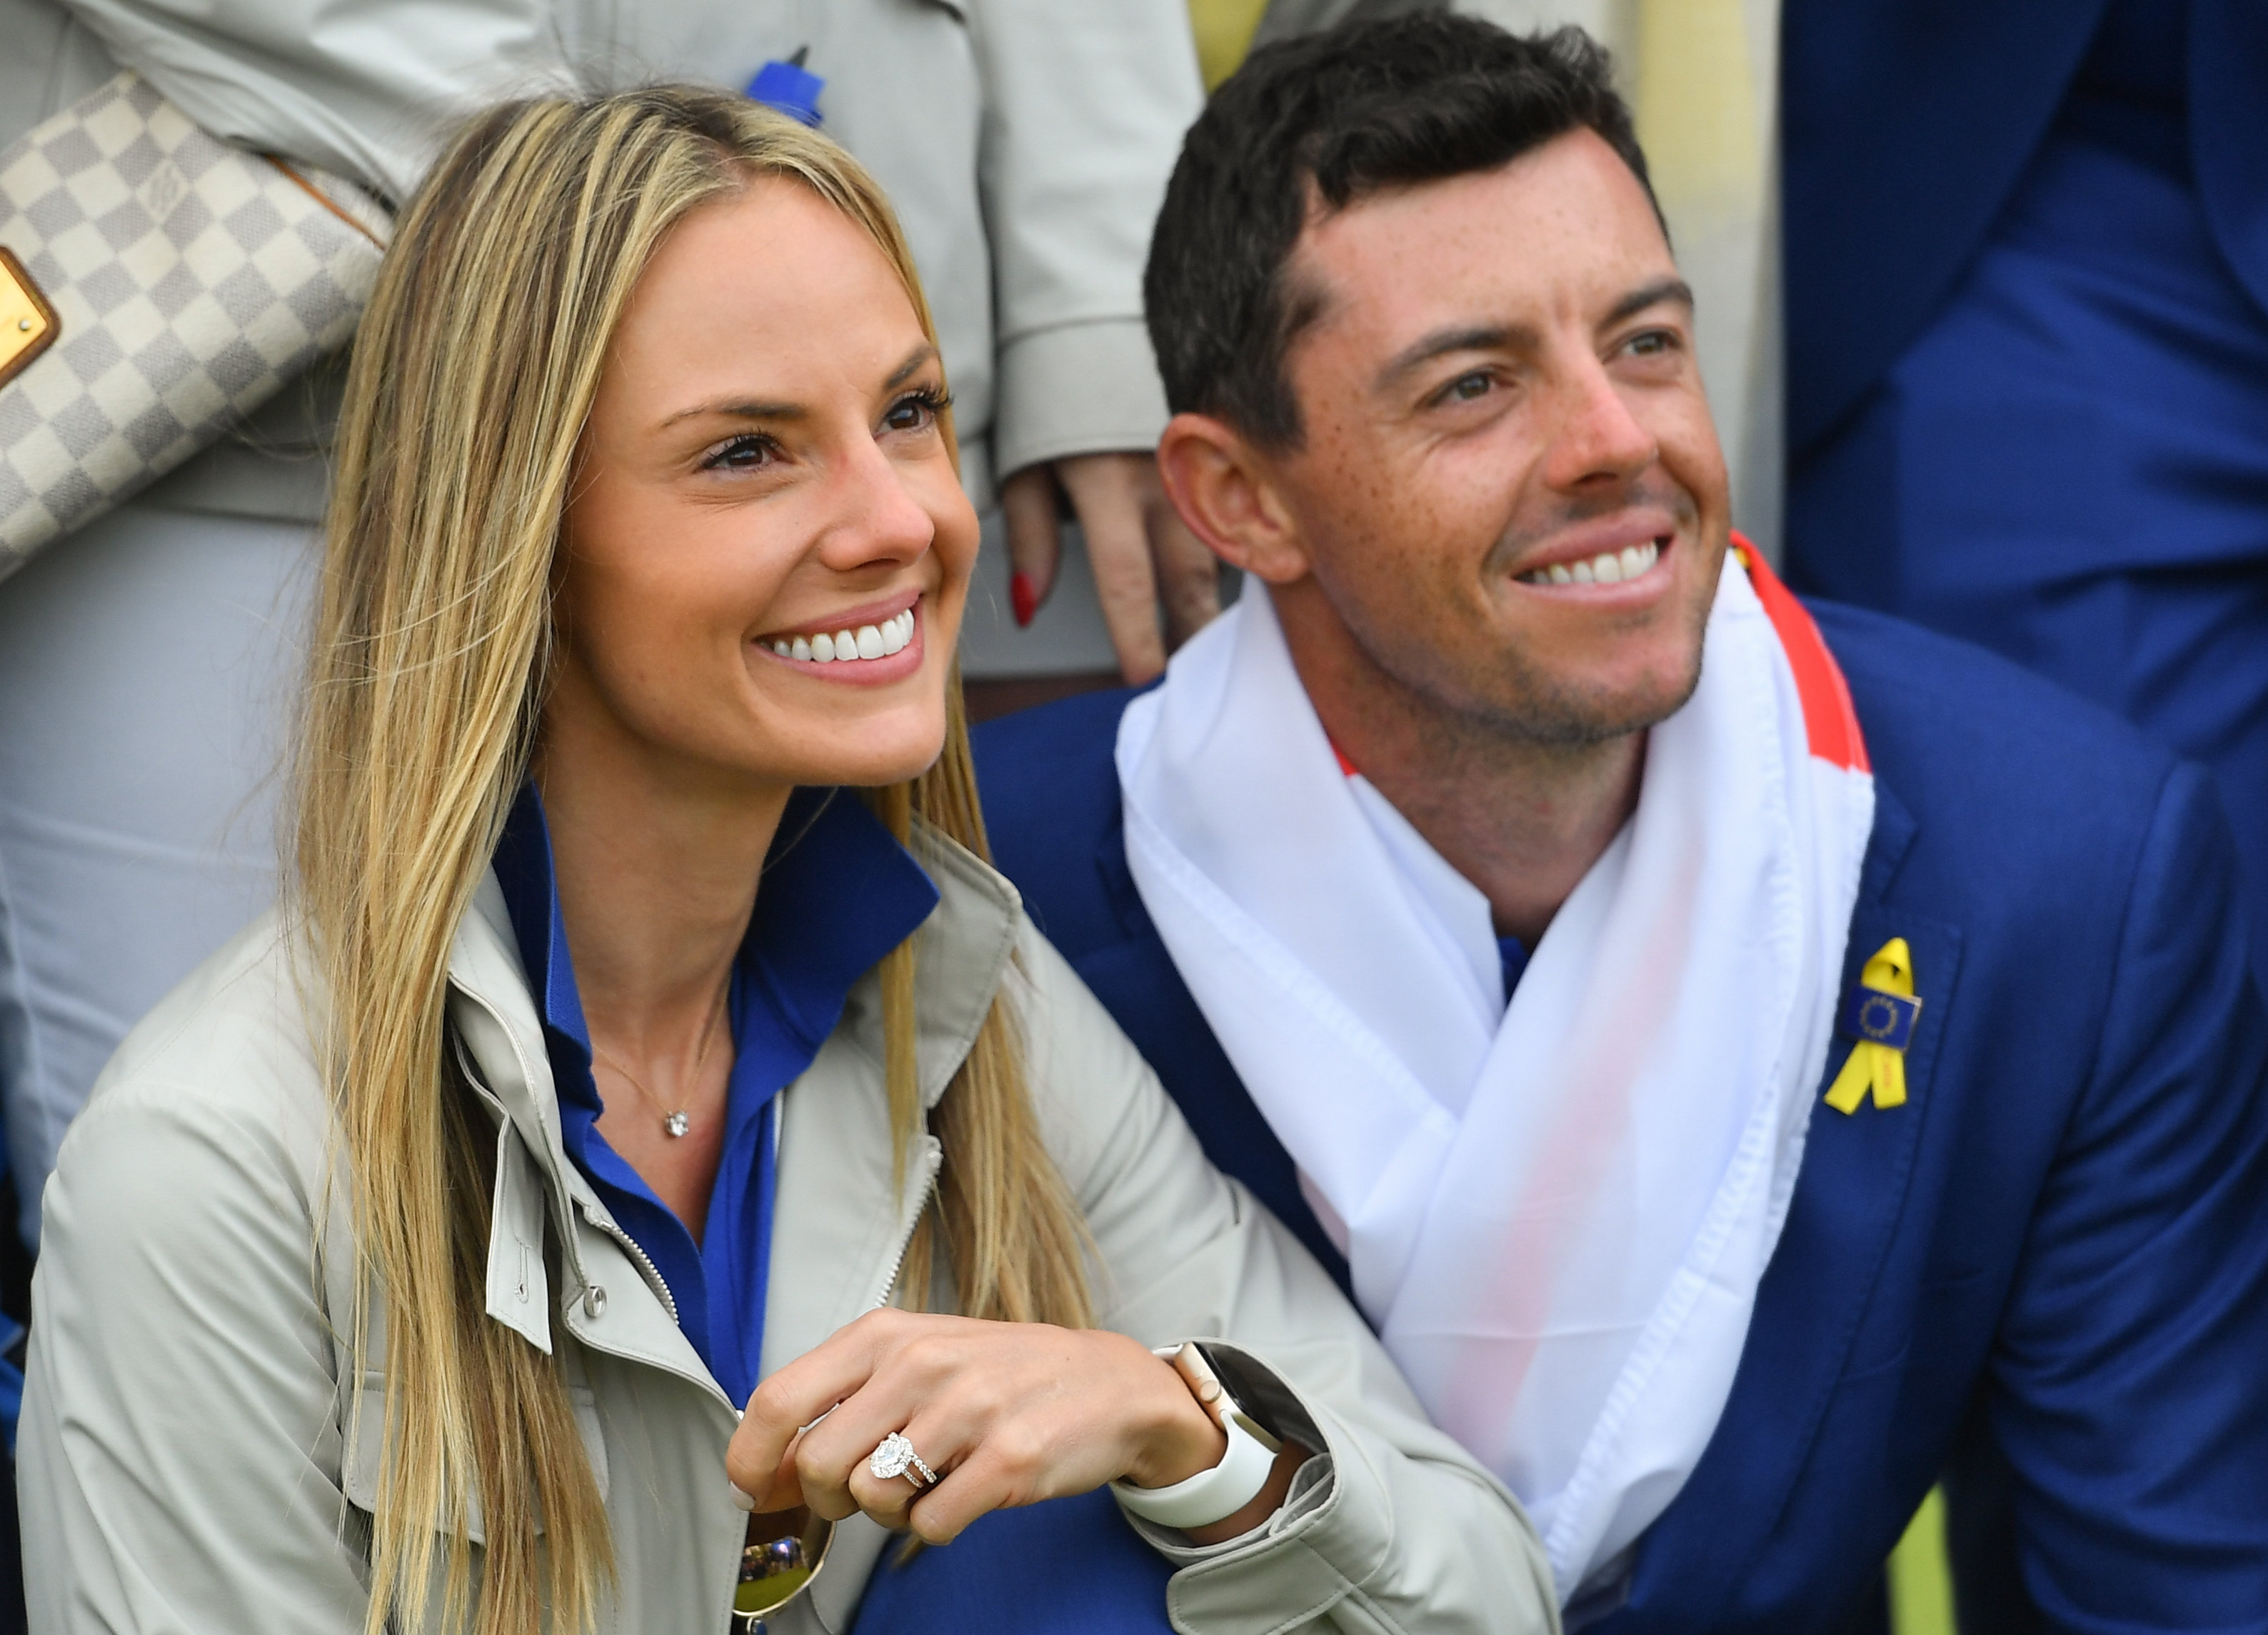 Rory Mcilroy Confirms Wife Is Pregnant And He D Bolt Tournament If She Goes Into Labor Golf News And Tour Information Golfdigest Com